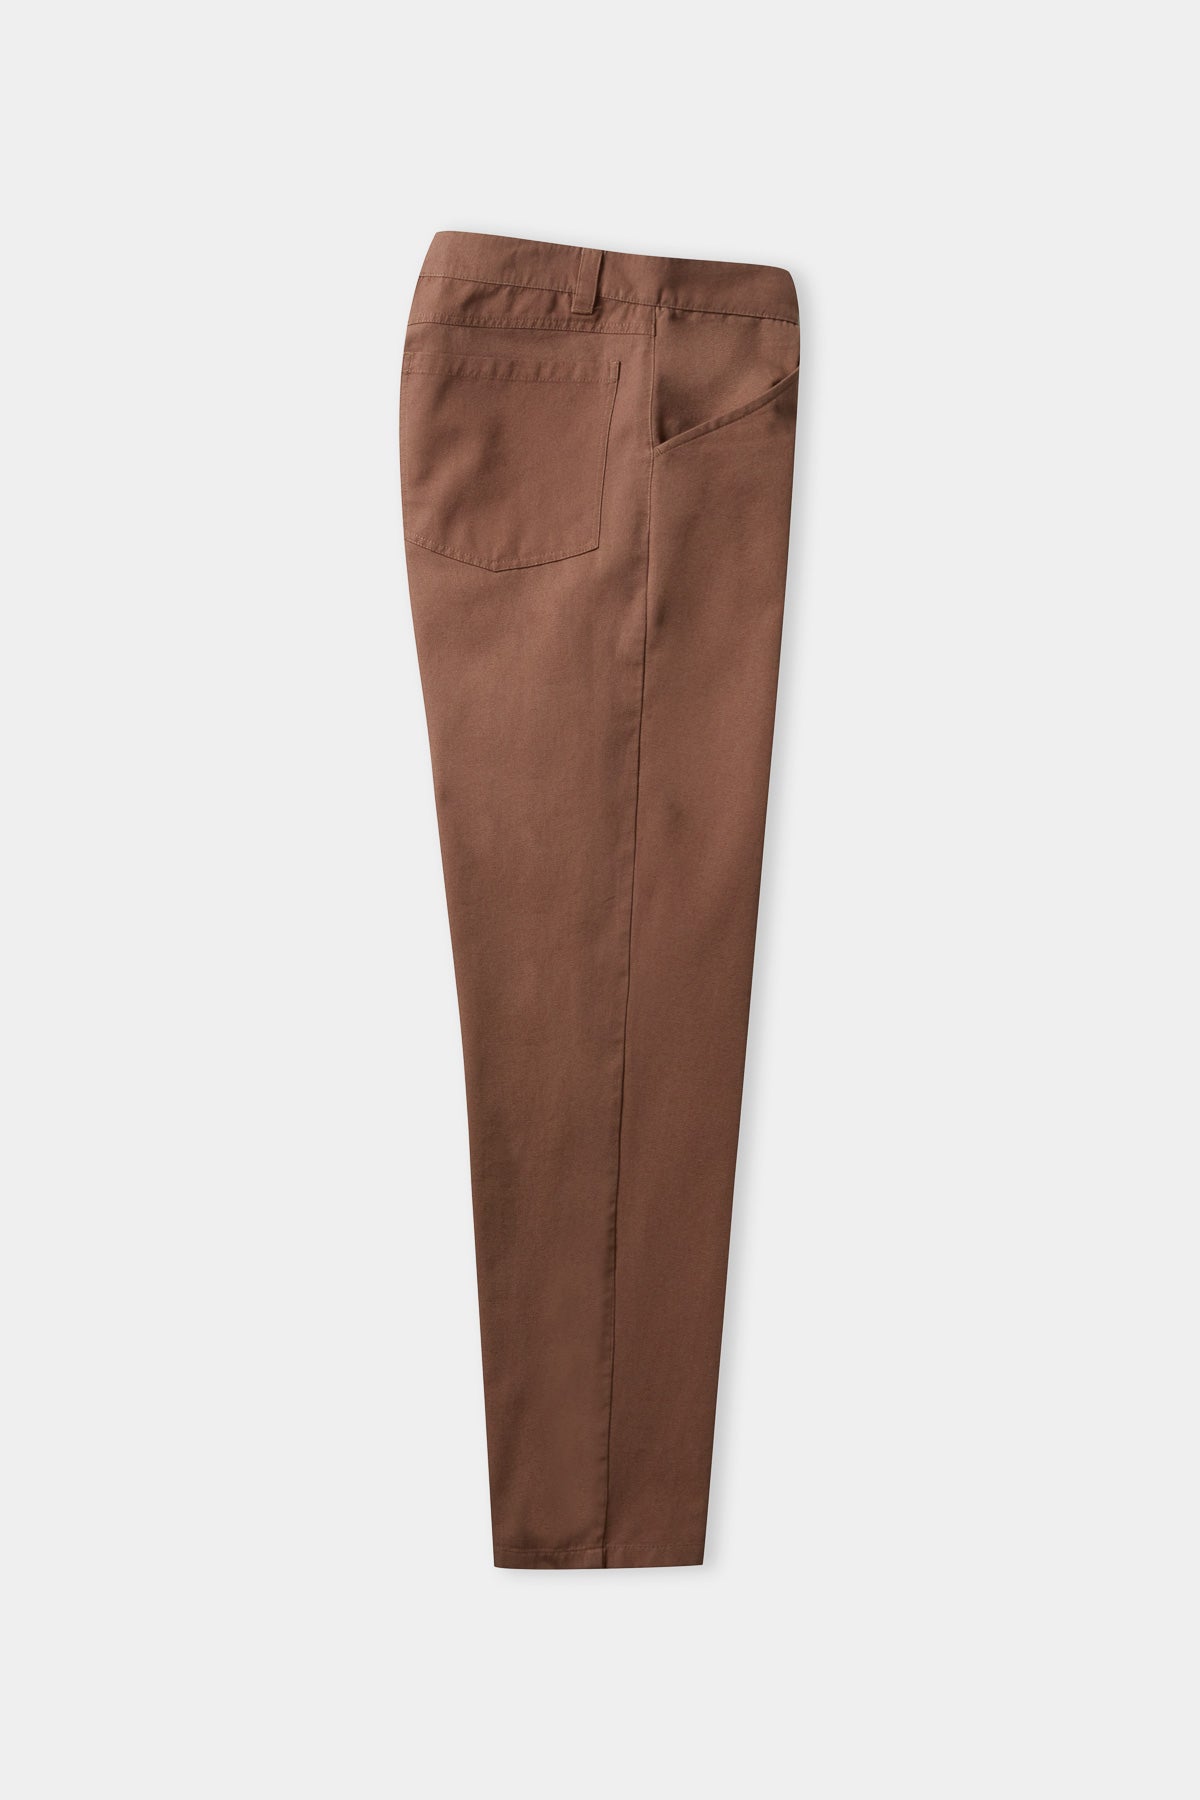 OLF trousers eco canvas moroccan red 230g